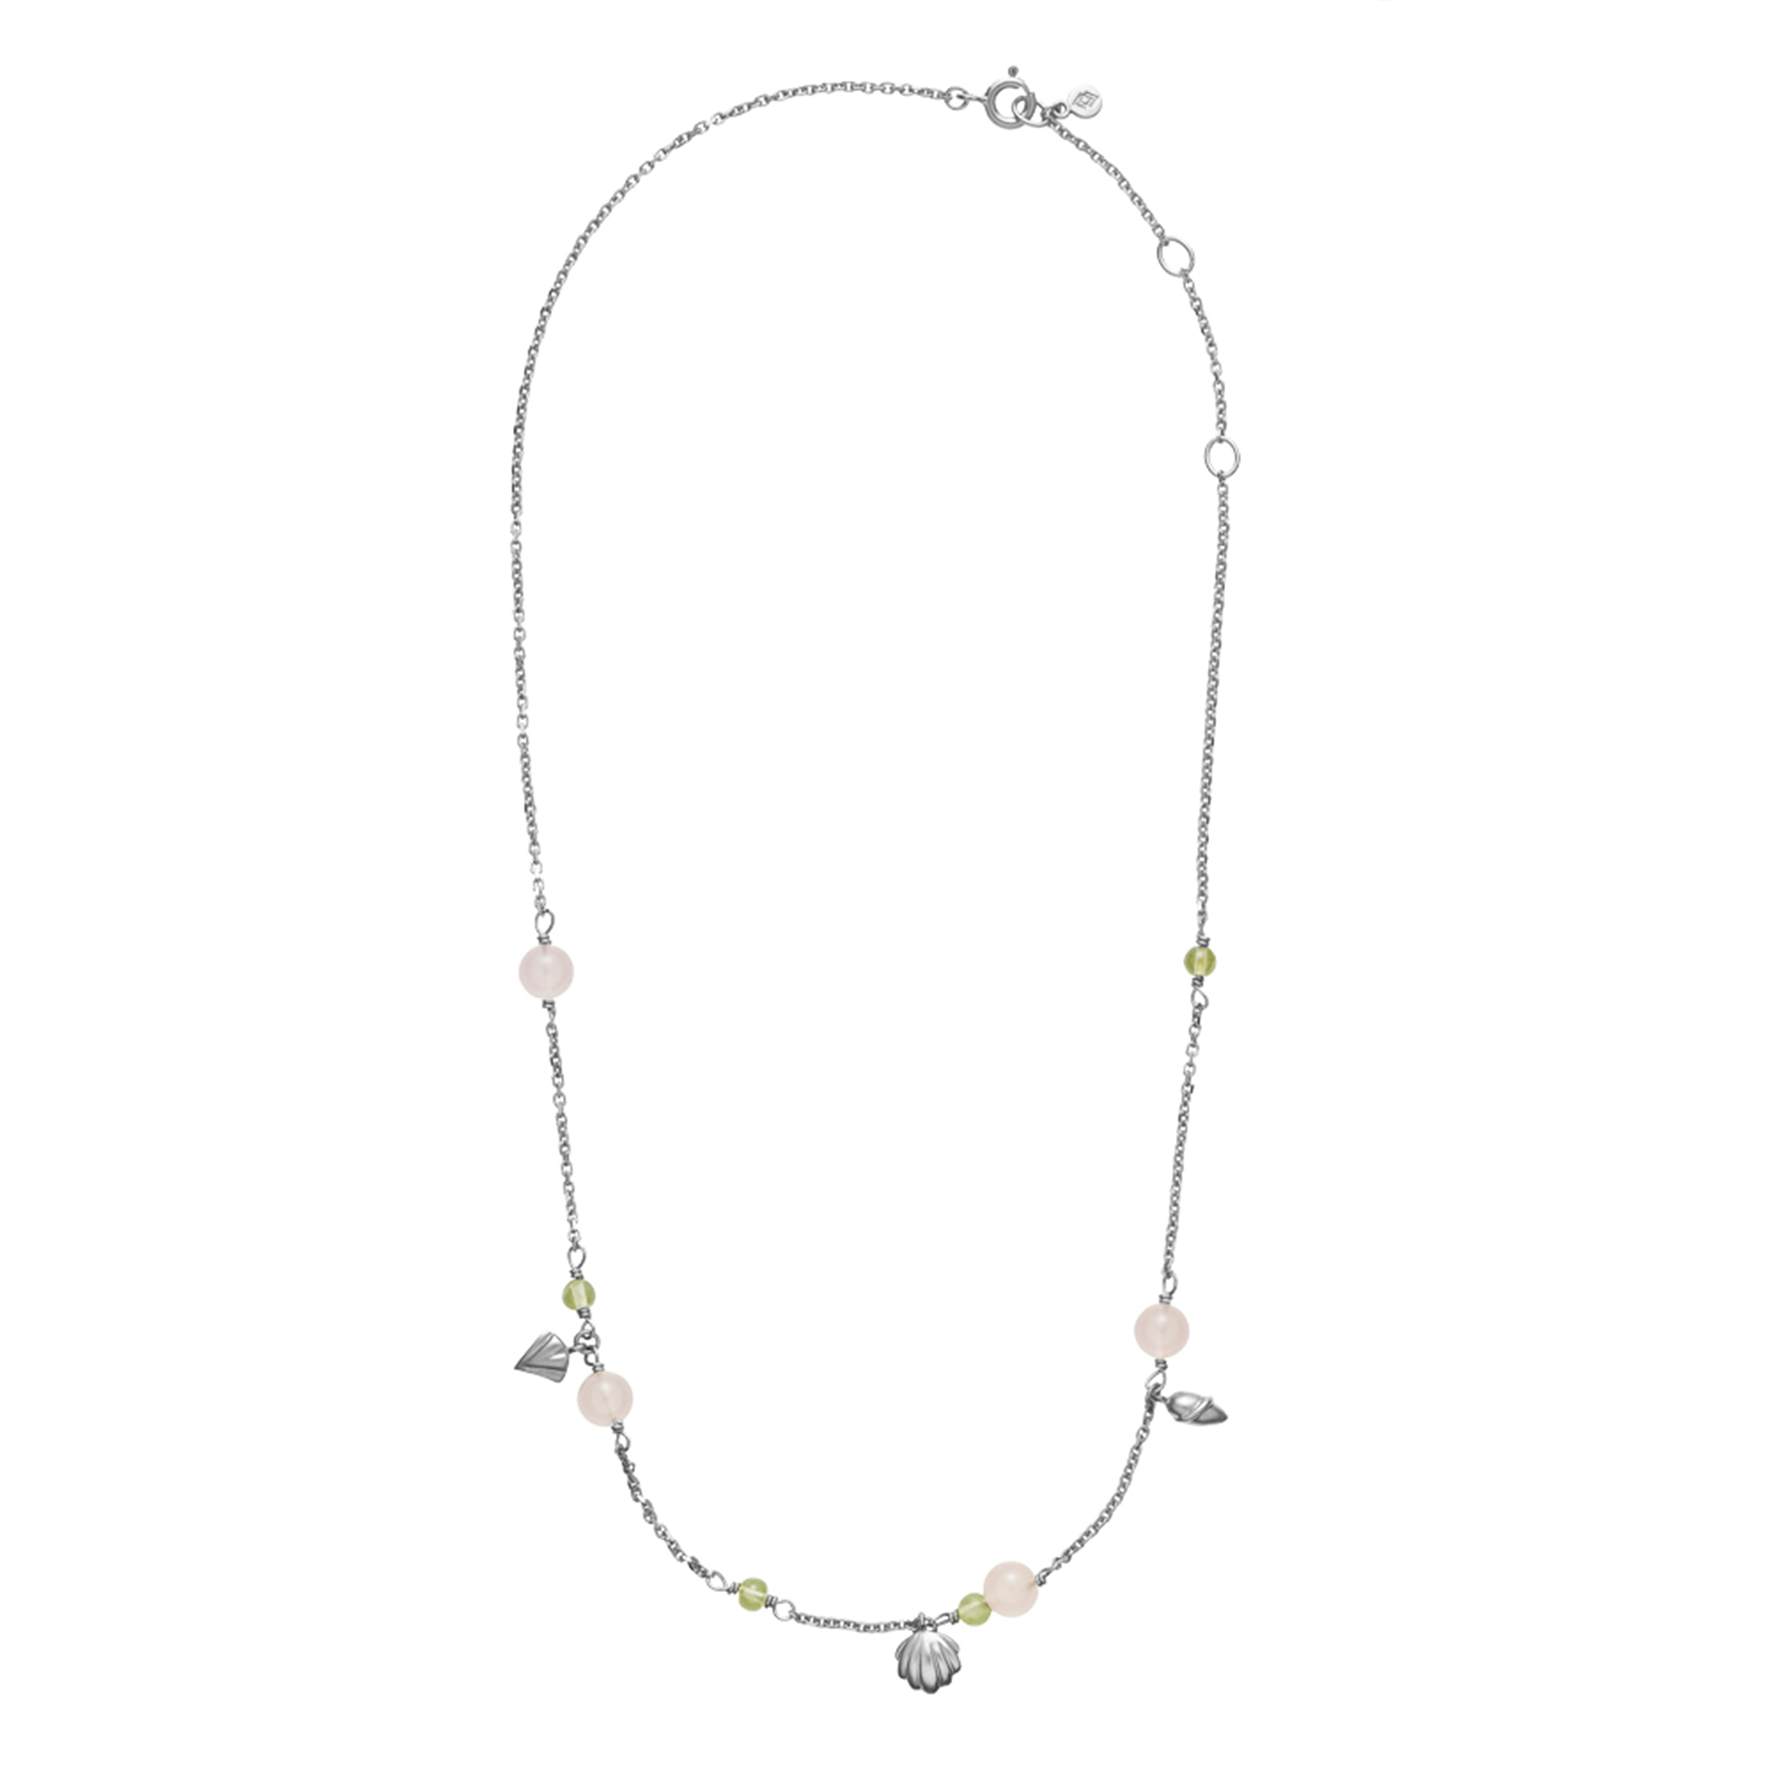 Isabella Pink/Green Necklace from Izabel Camille in Silver Sterling 925